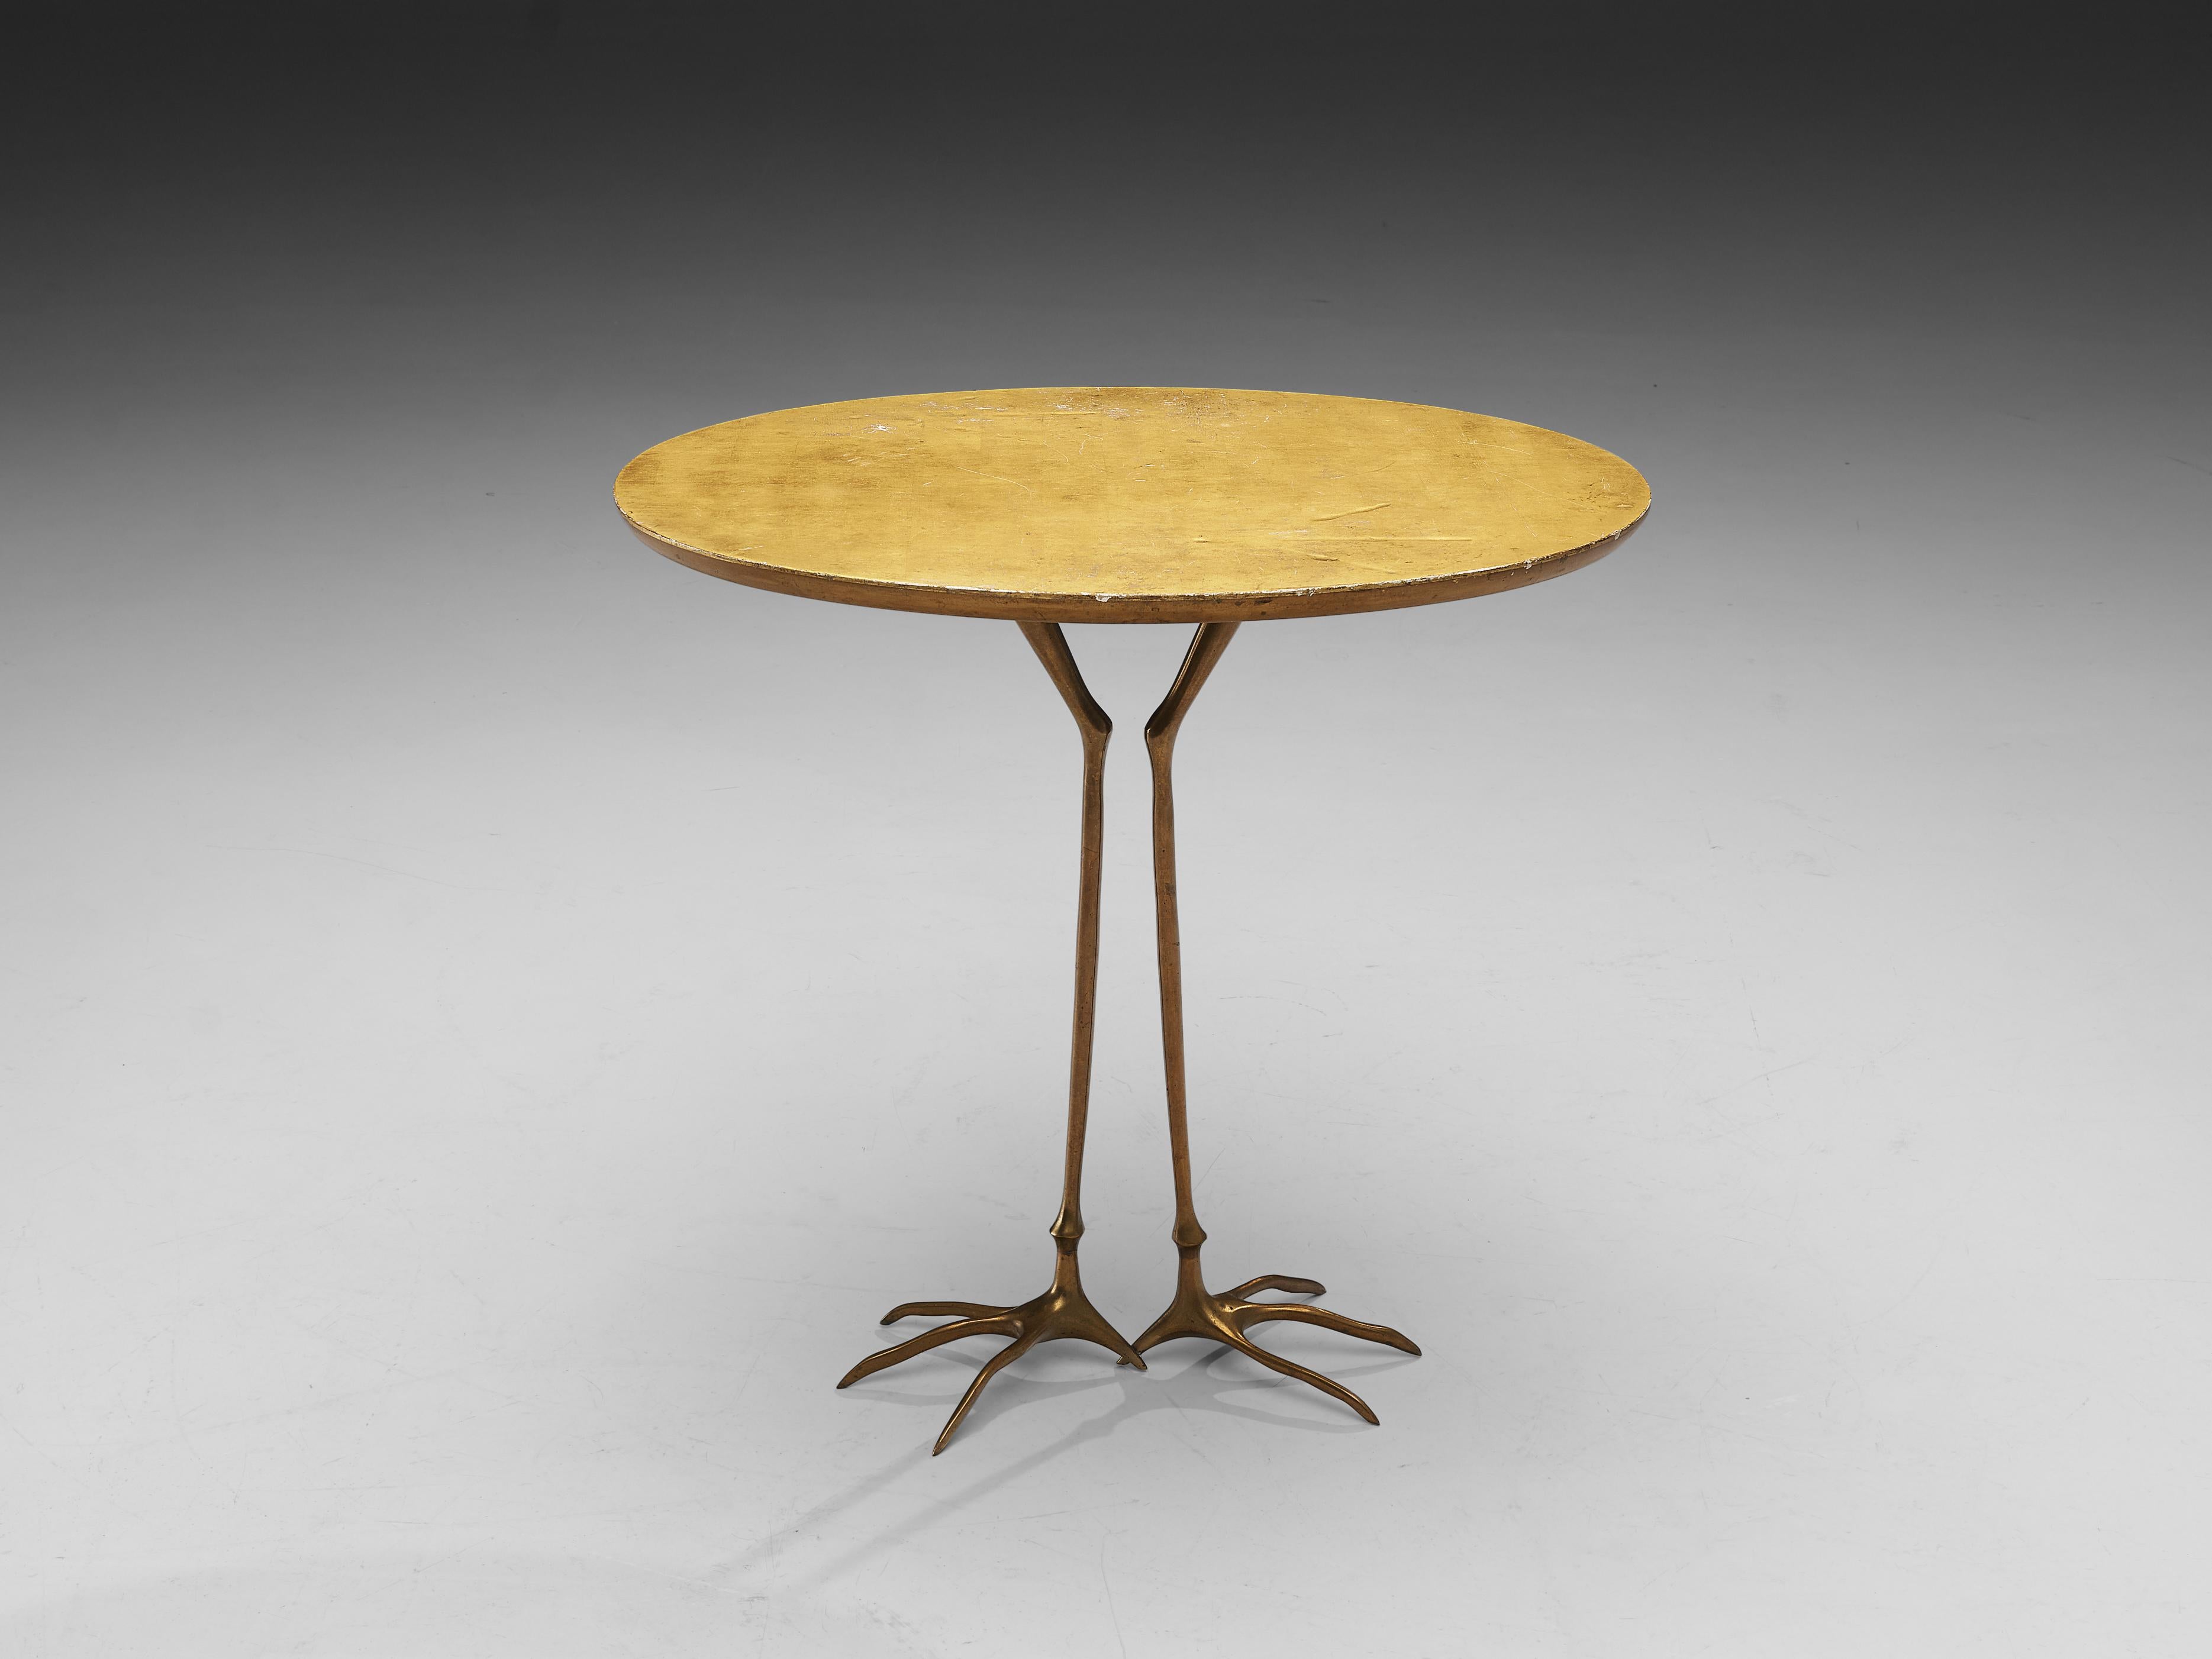 Meret Oppenheim 'Traccia' Coffee Table in Gilded Wood and Brass  2